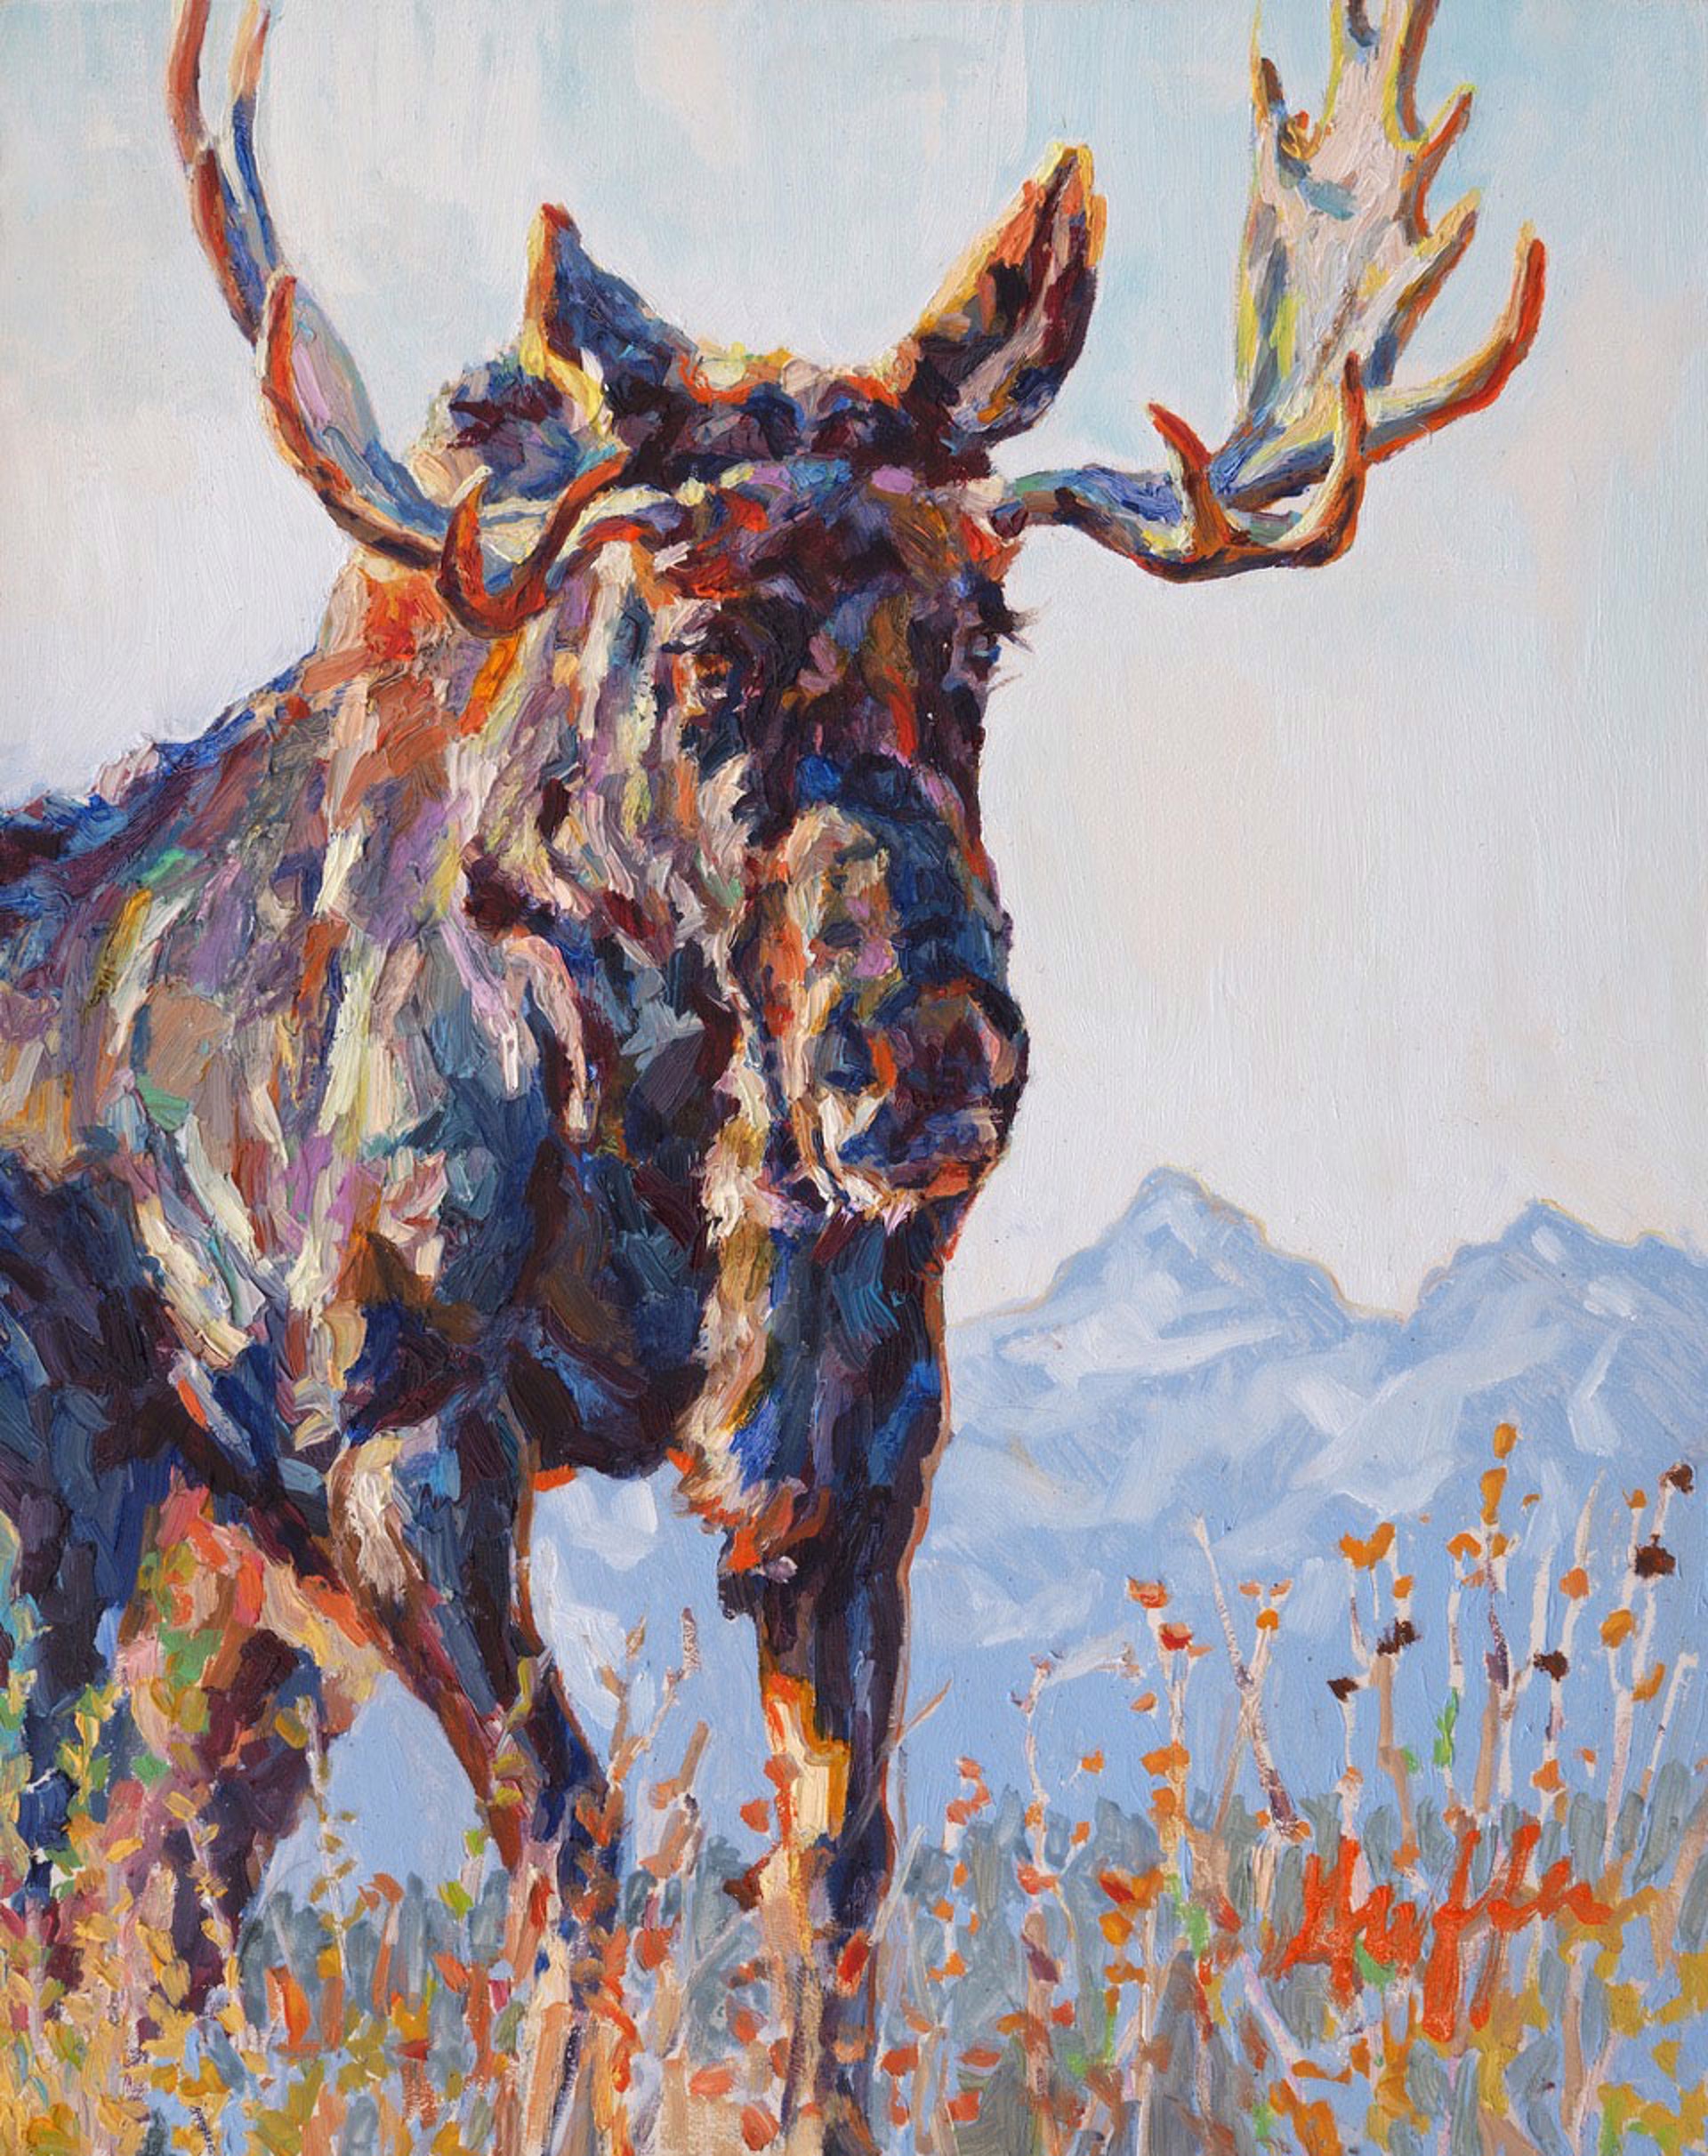 Original Oil Painting Featuring A Moose In Impressionist Style With Mountains In The Distant Background